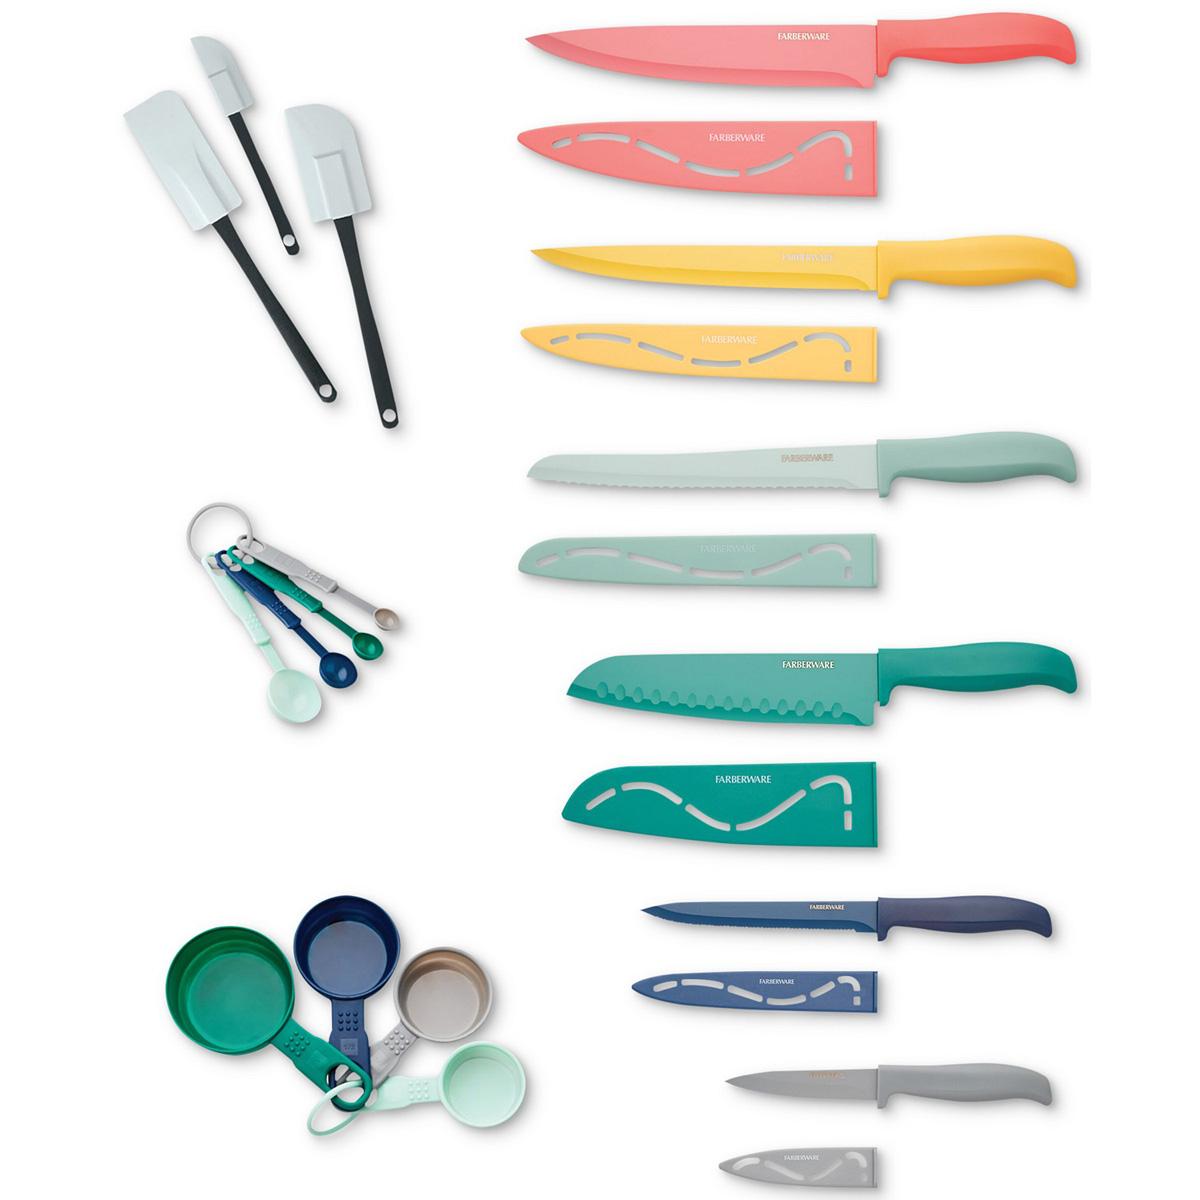 23-Piece Farberware Resin Kitchen Cutlery and Gadget Set for $19.99